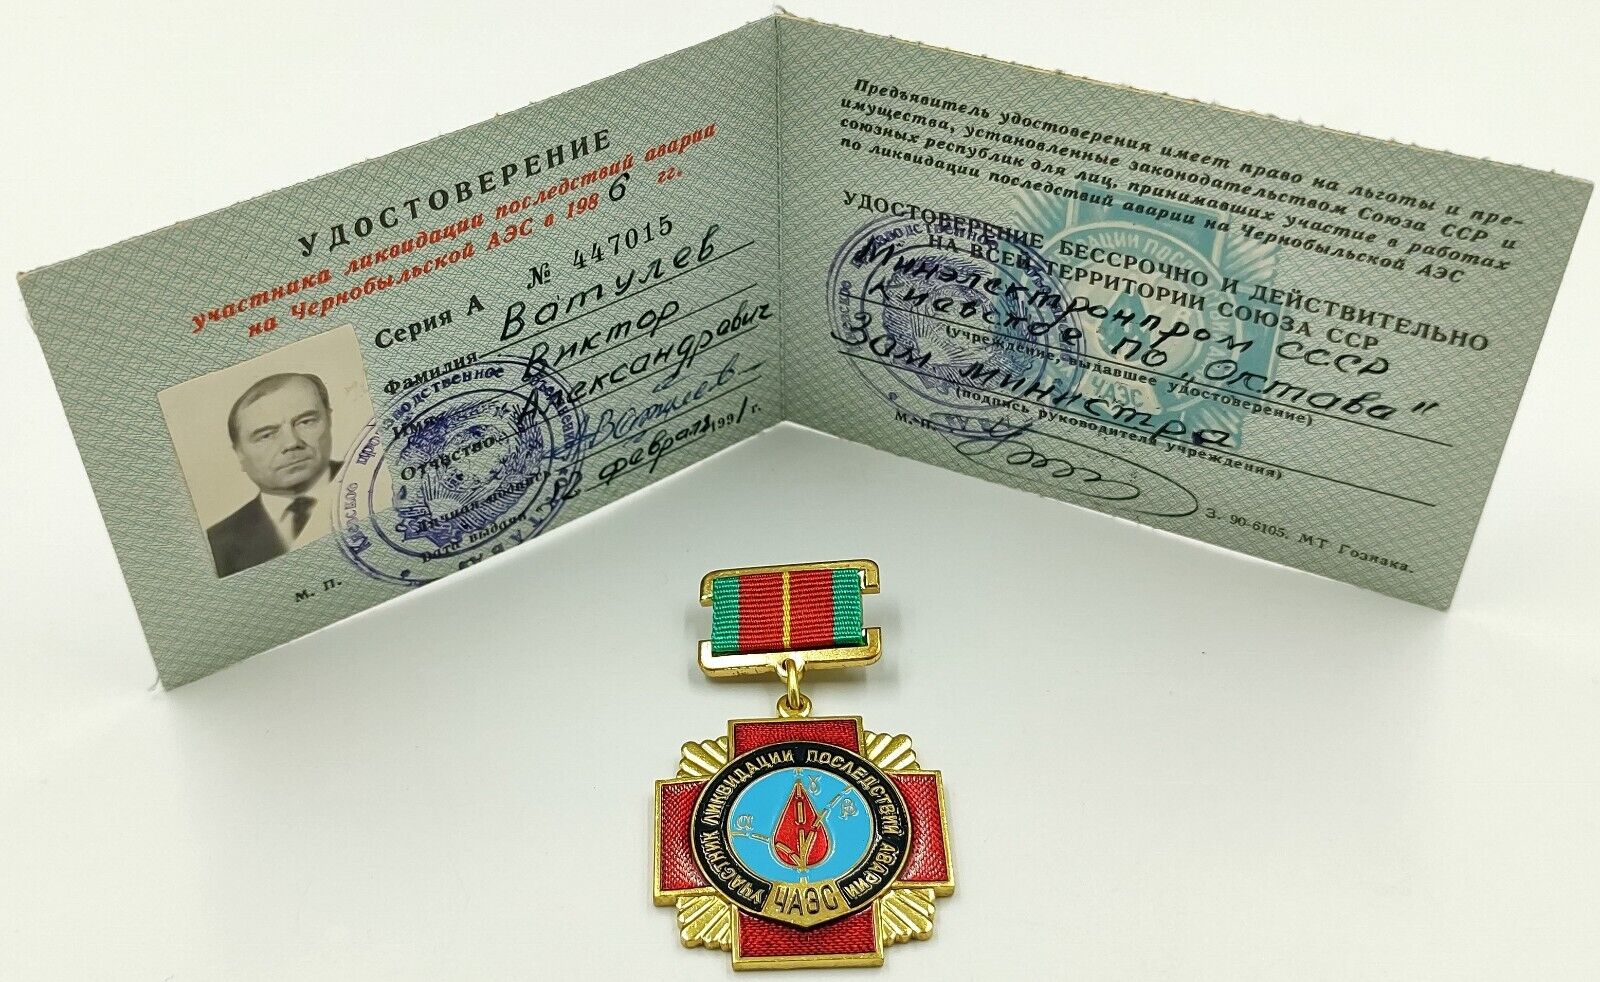 Chernobyl  liquidation participant RARE documents and medal Nuclear Disaster